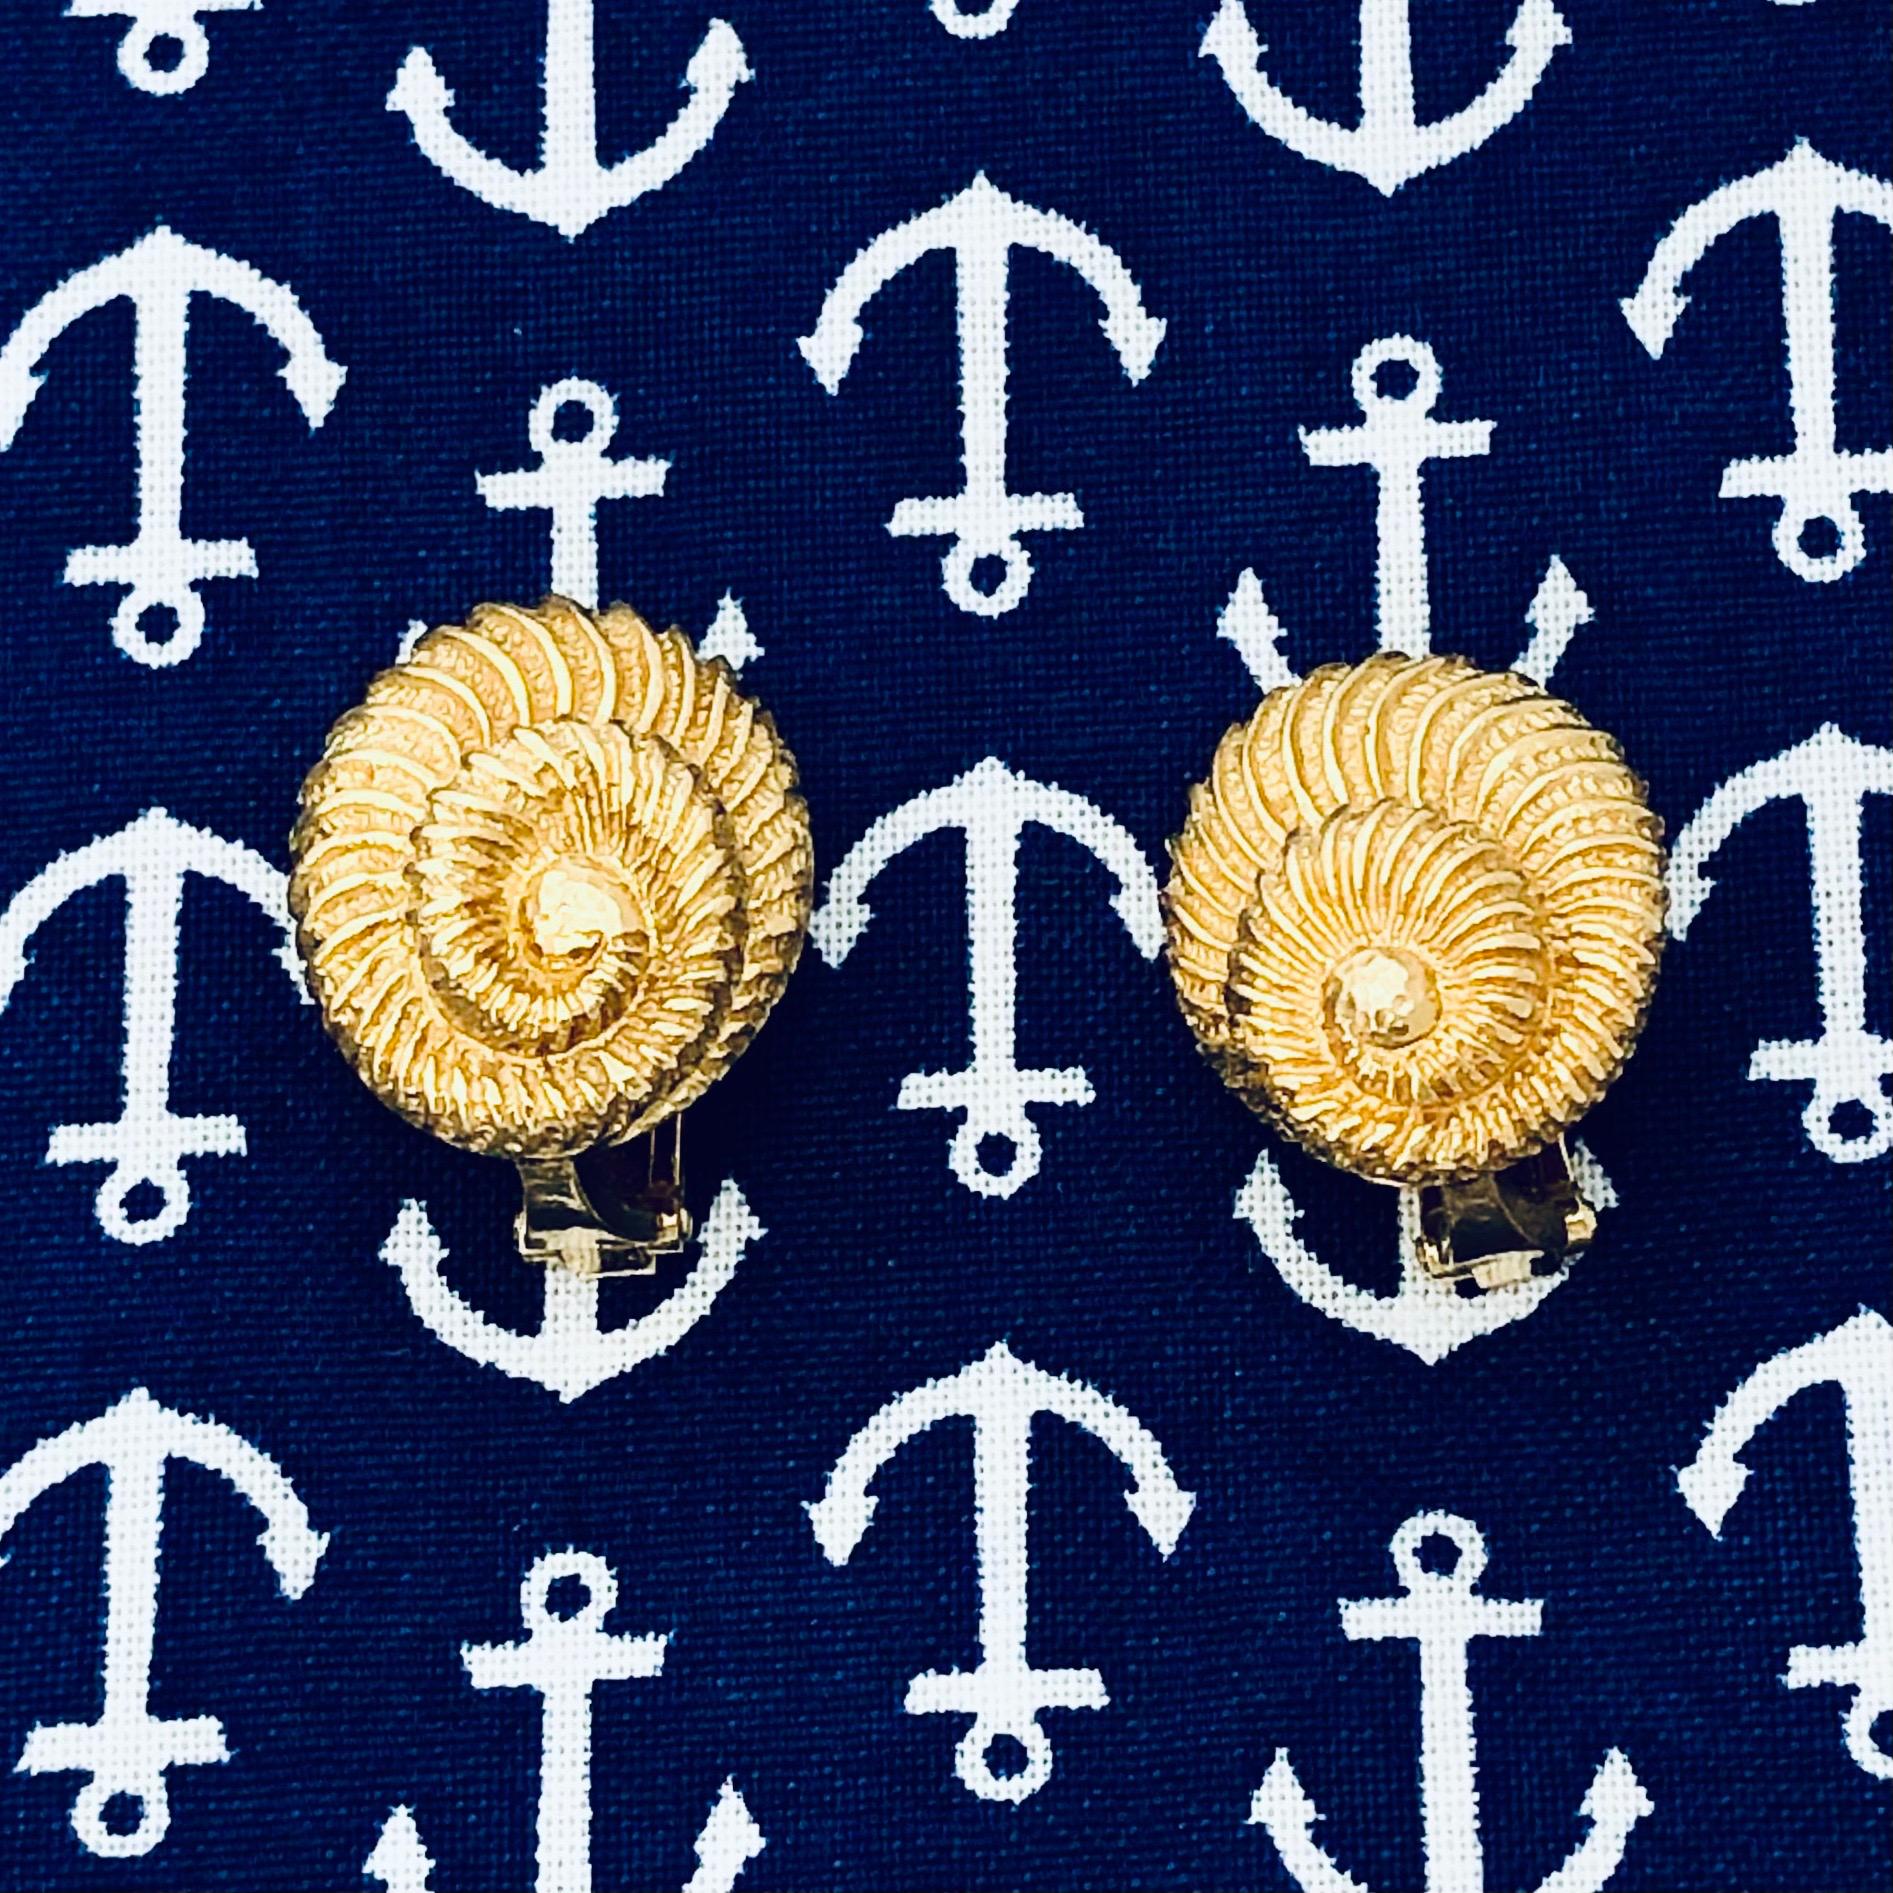 This very life like pair of Webb seashell earrings are crafted with tremendous detail from 18k yellow gold and measure 13/16 inches by 5/8 inches and rise, at their apex, to 3/8 inches above the ear giving making them three dimensional. The use of a